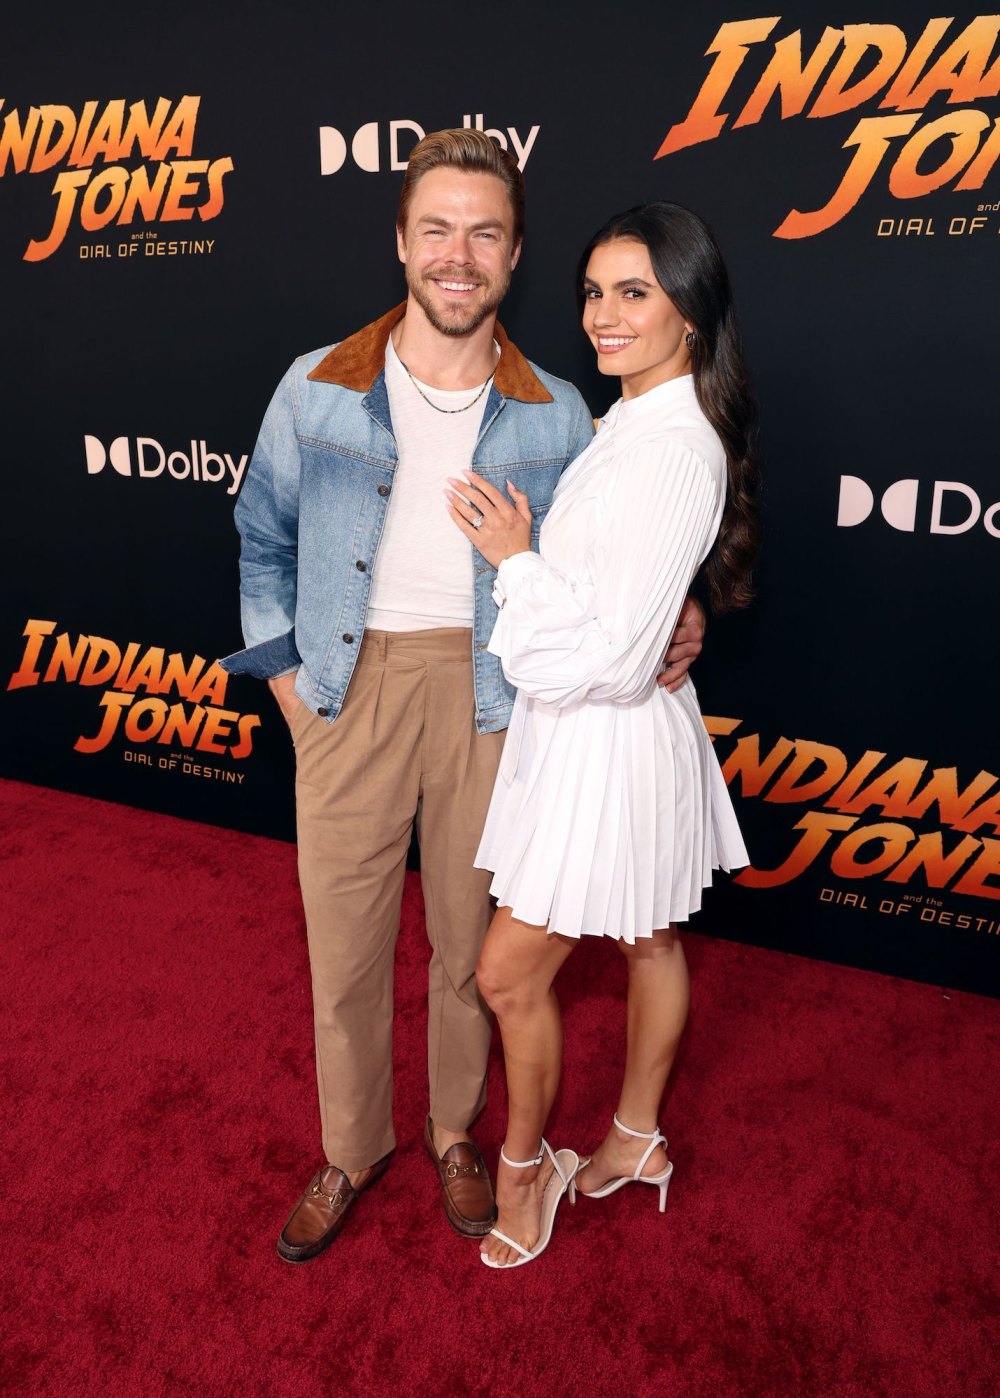 Derek Hough Dedicates Emmy Win to Wife Hayley 1 Month After Health Scare